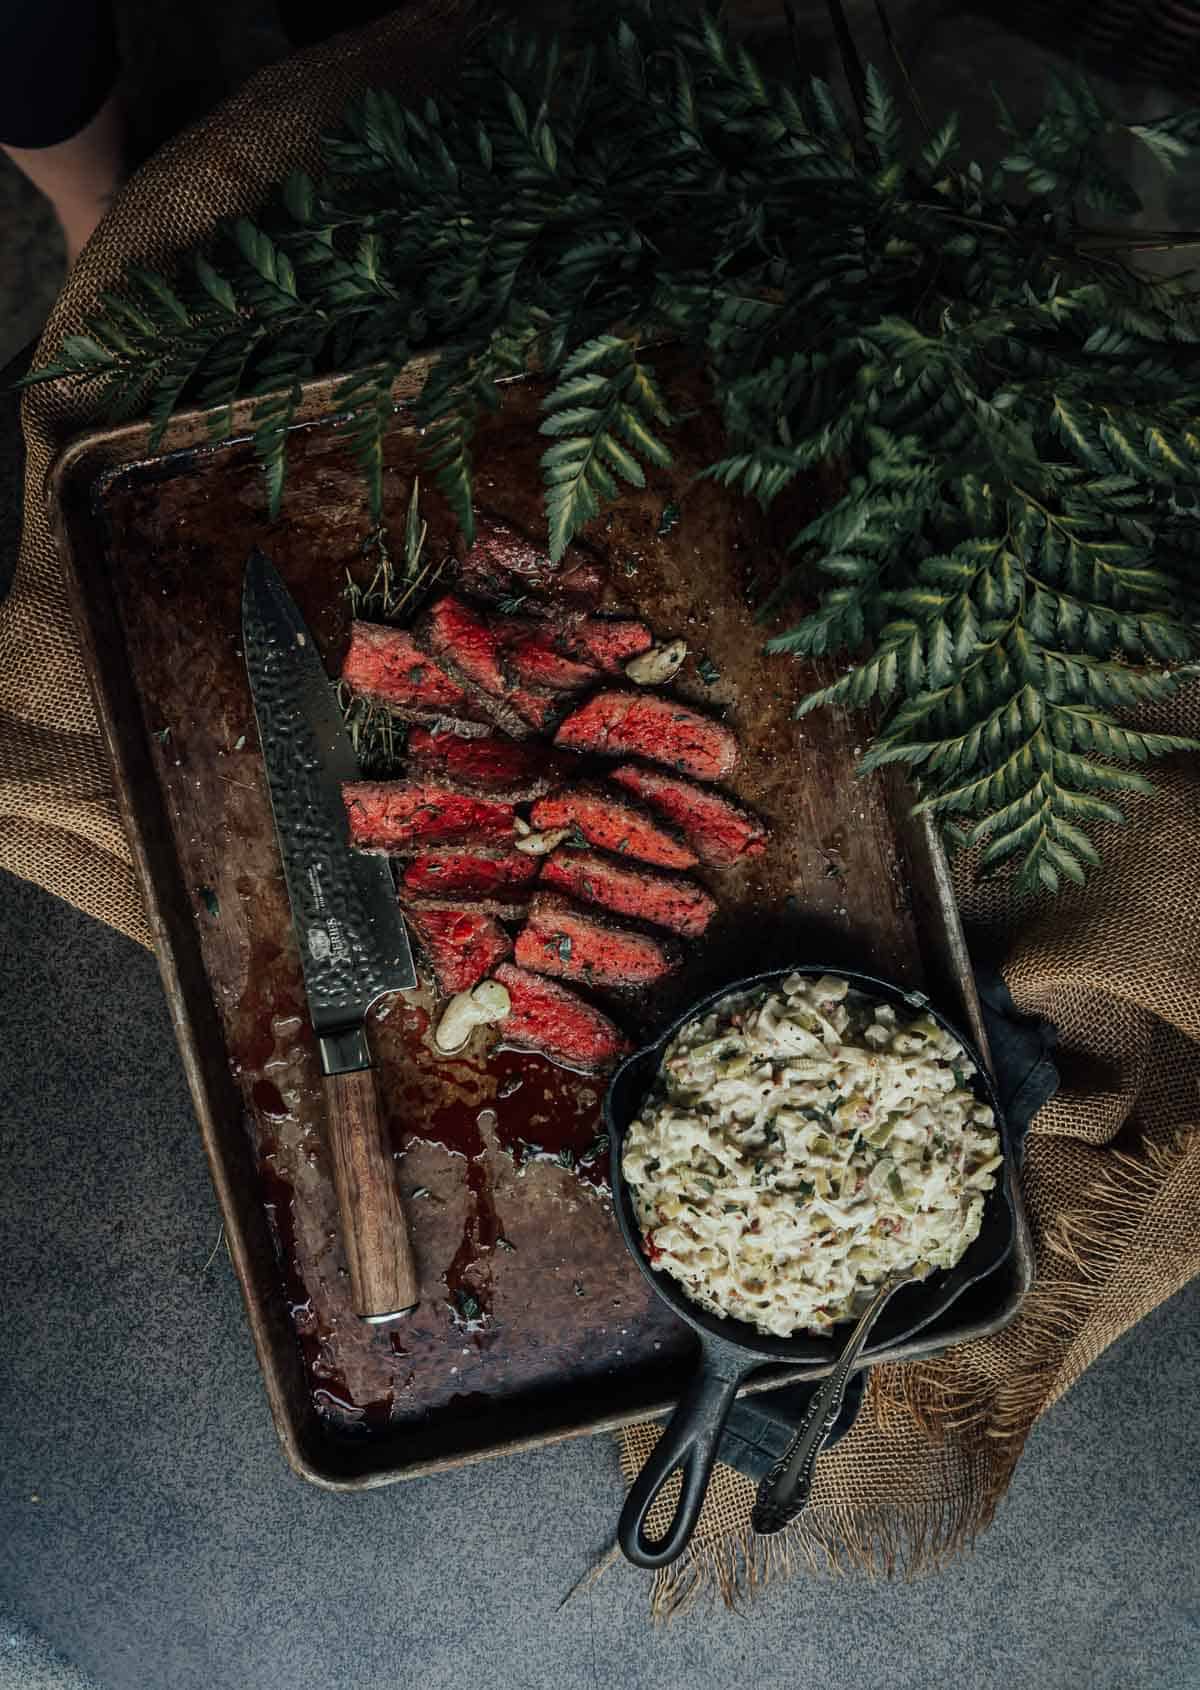 A steak on a tray with rice and a knife.